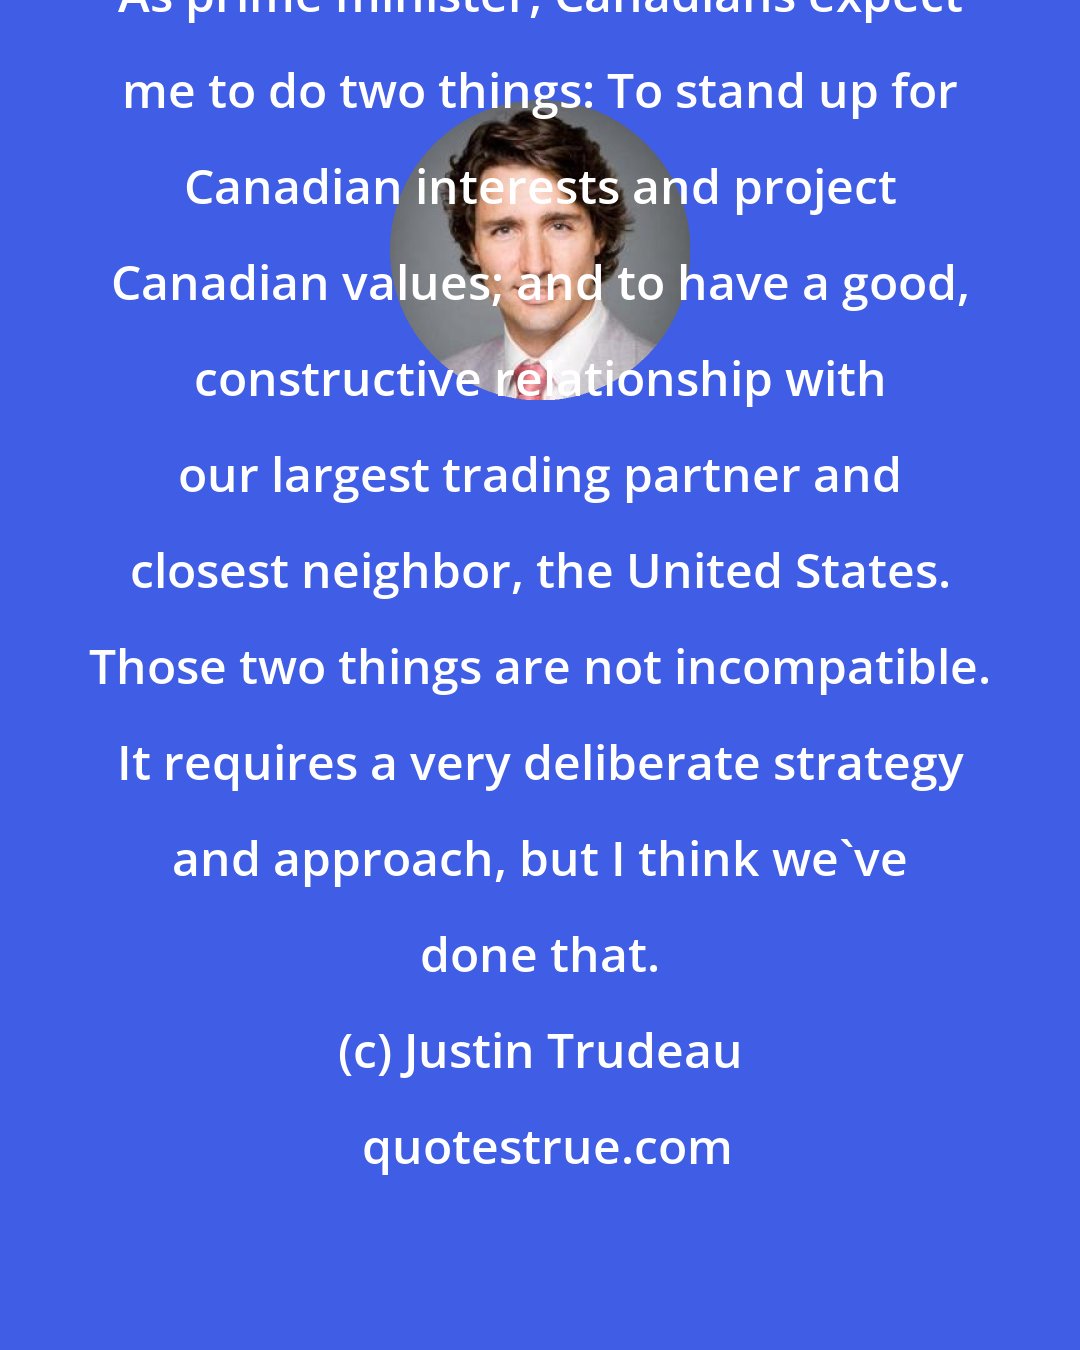 Justin Trudeau: As prime minister, Canadians expect me to do two things: To stand up for Canadian interests and project Canadian values; and to have a good, constructive relationship with our largest trading partner and closest neighbor, the United States. Those two things are not incompatible. It requires a very deliberate strategy and approach, but I think we've done that.